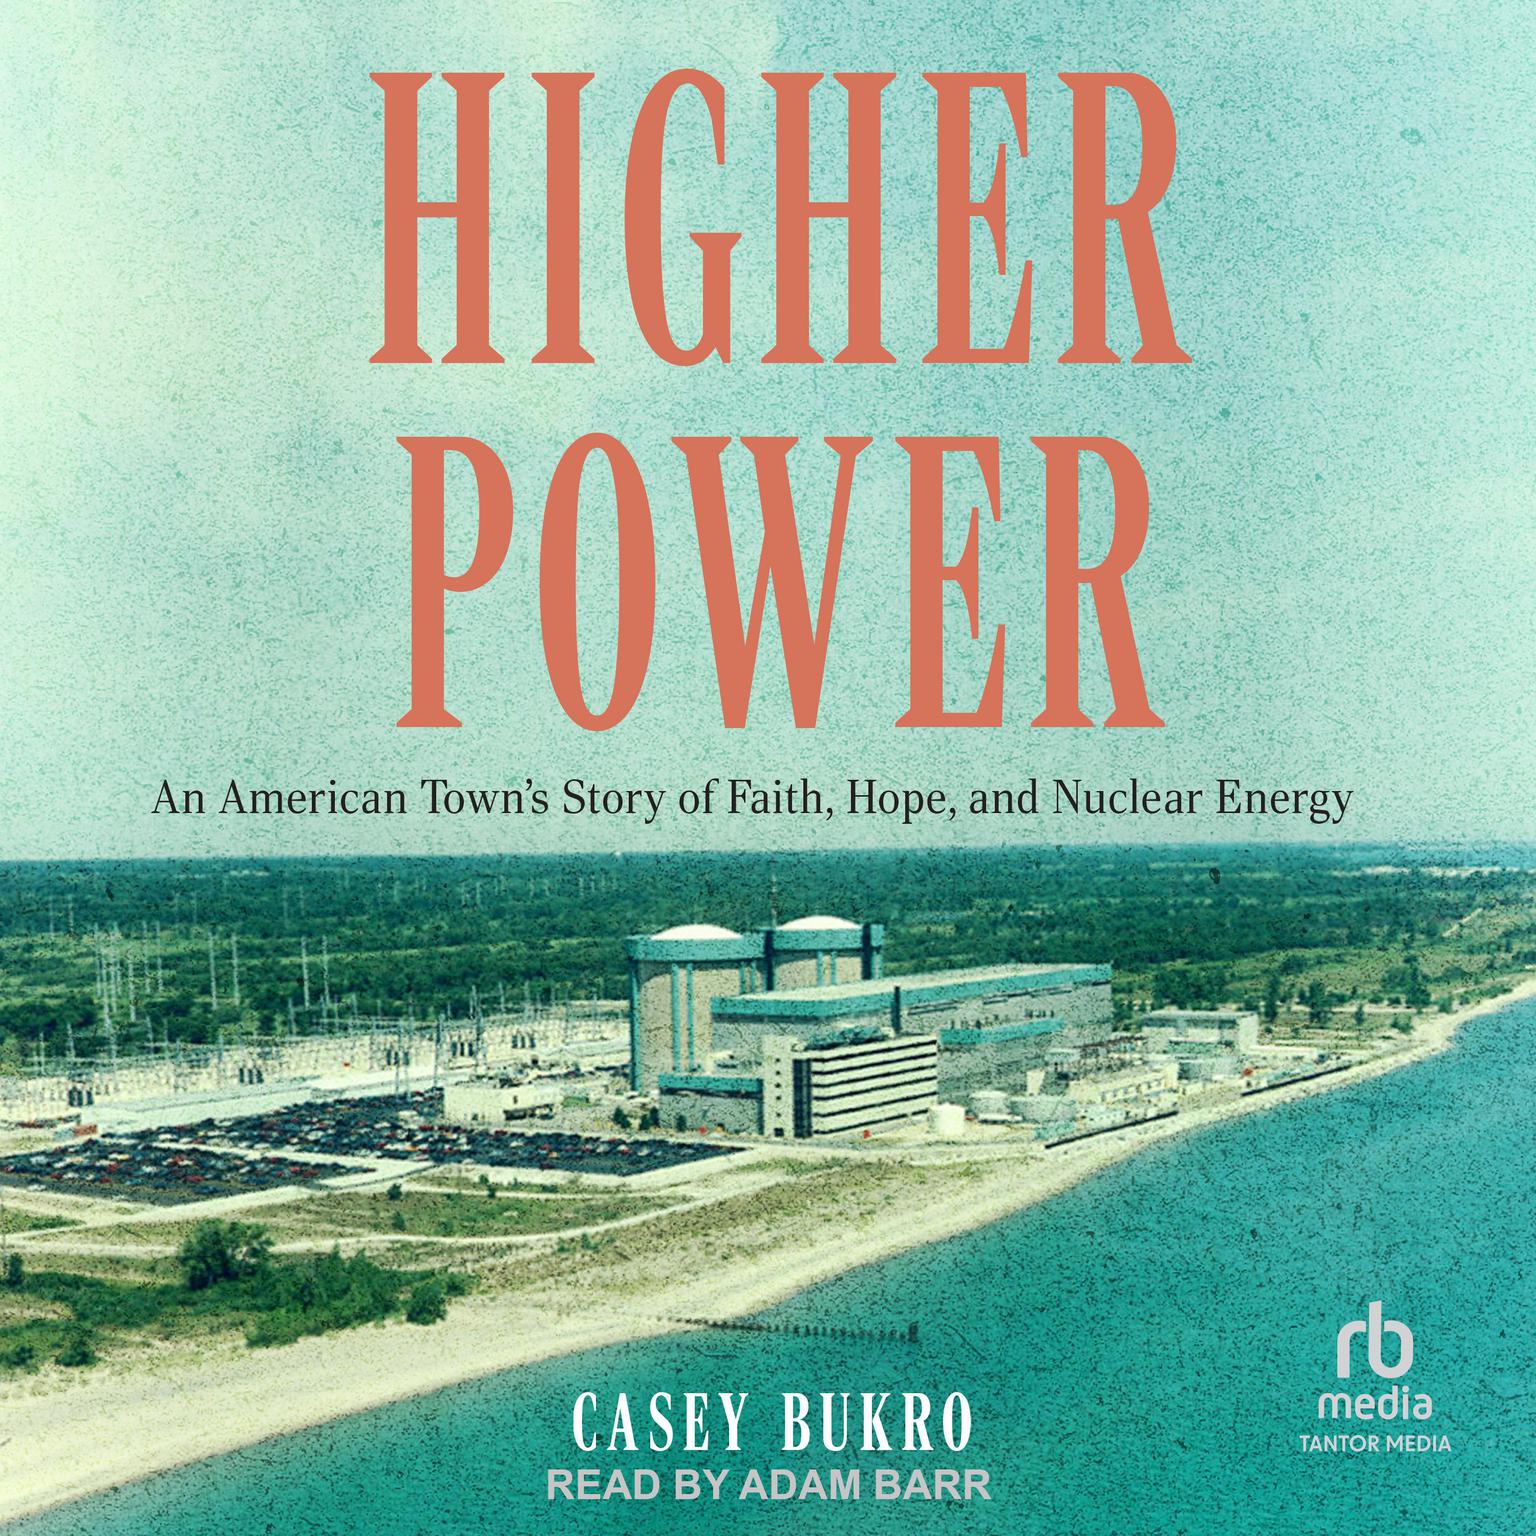 Higher Power: An American Town’s Story of Faith, Hope, and Nuclear Energy Audiobook, by Casey Bukro